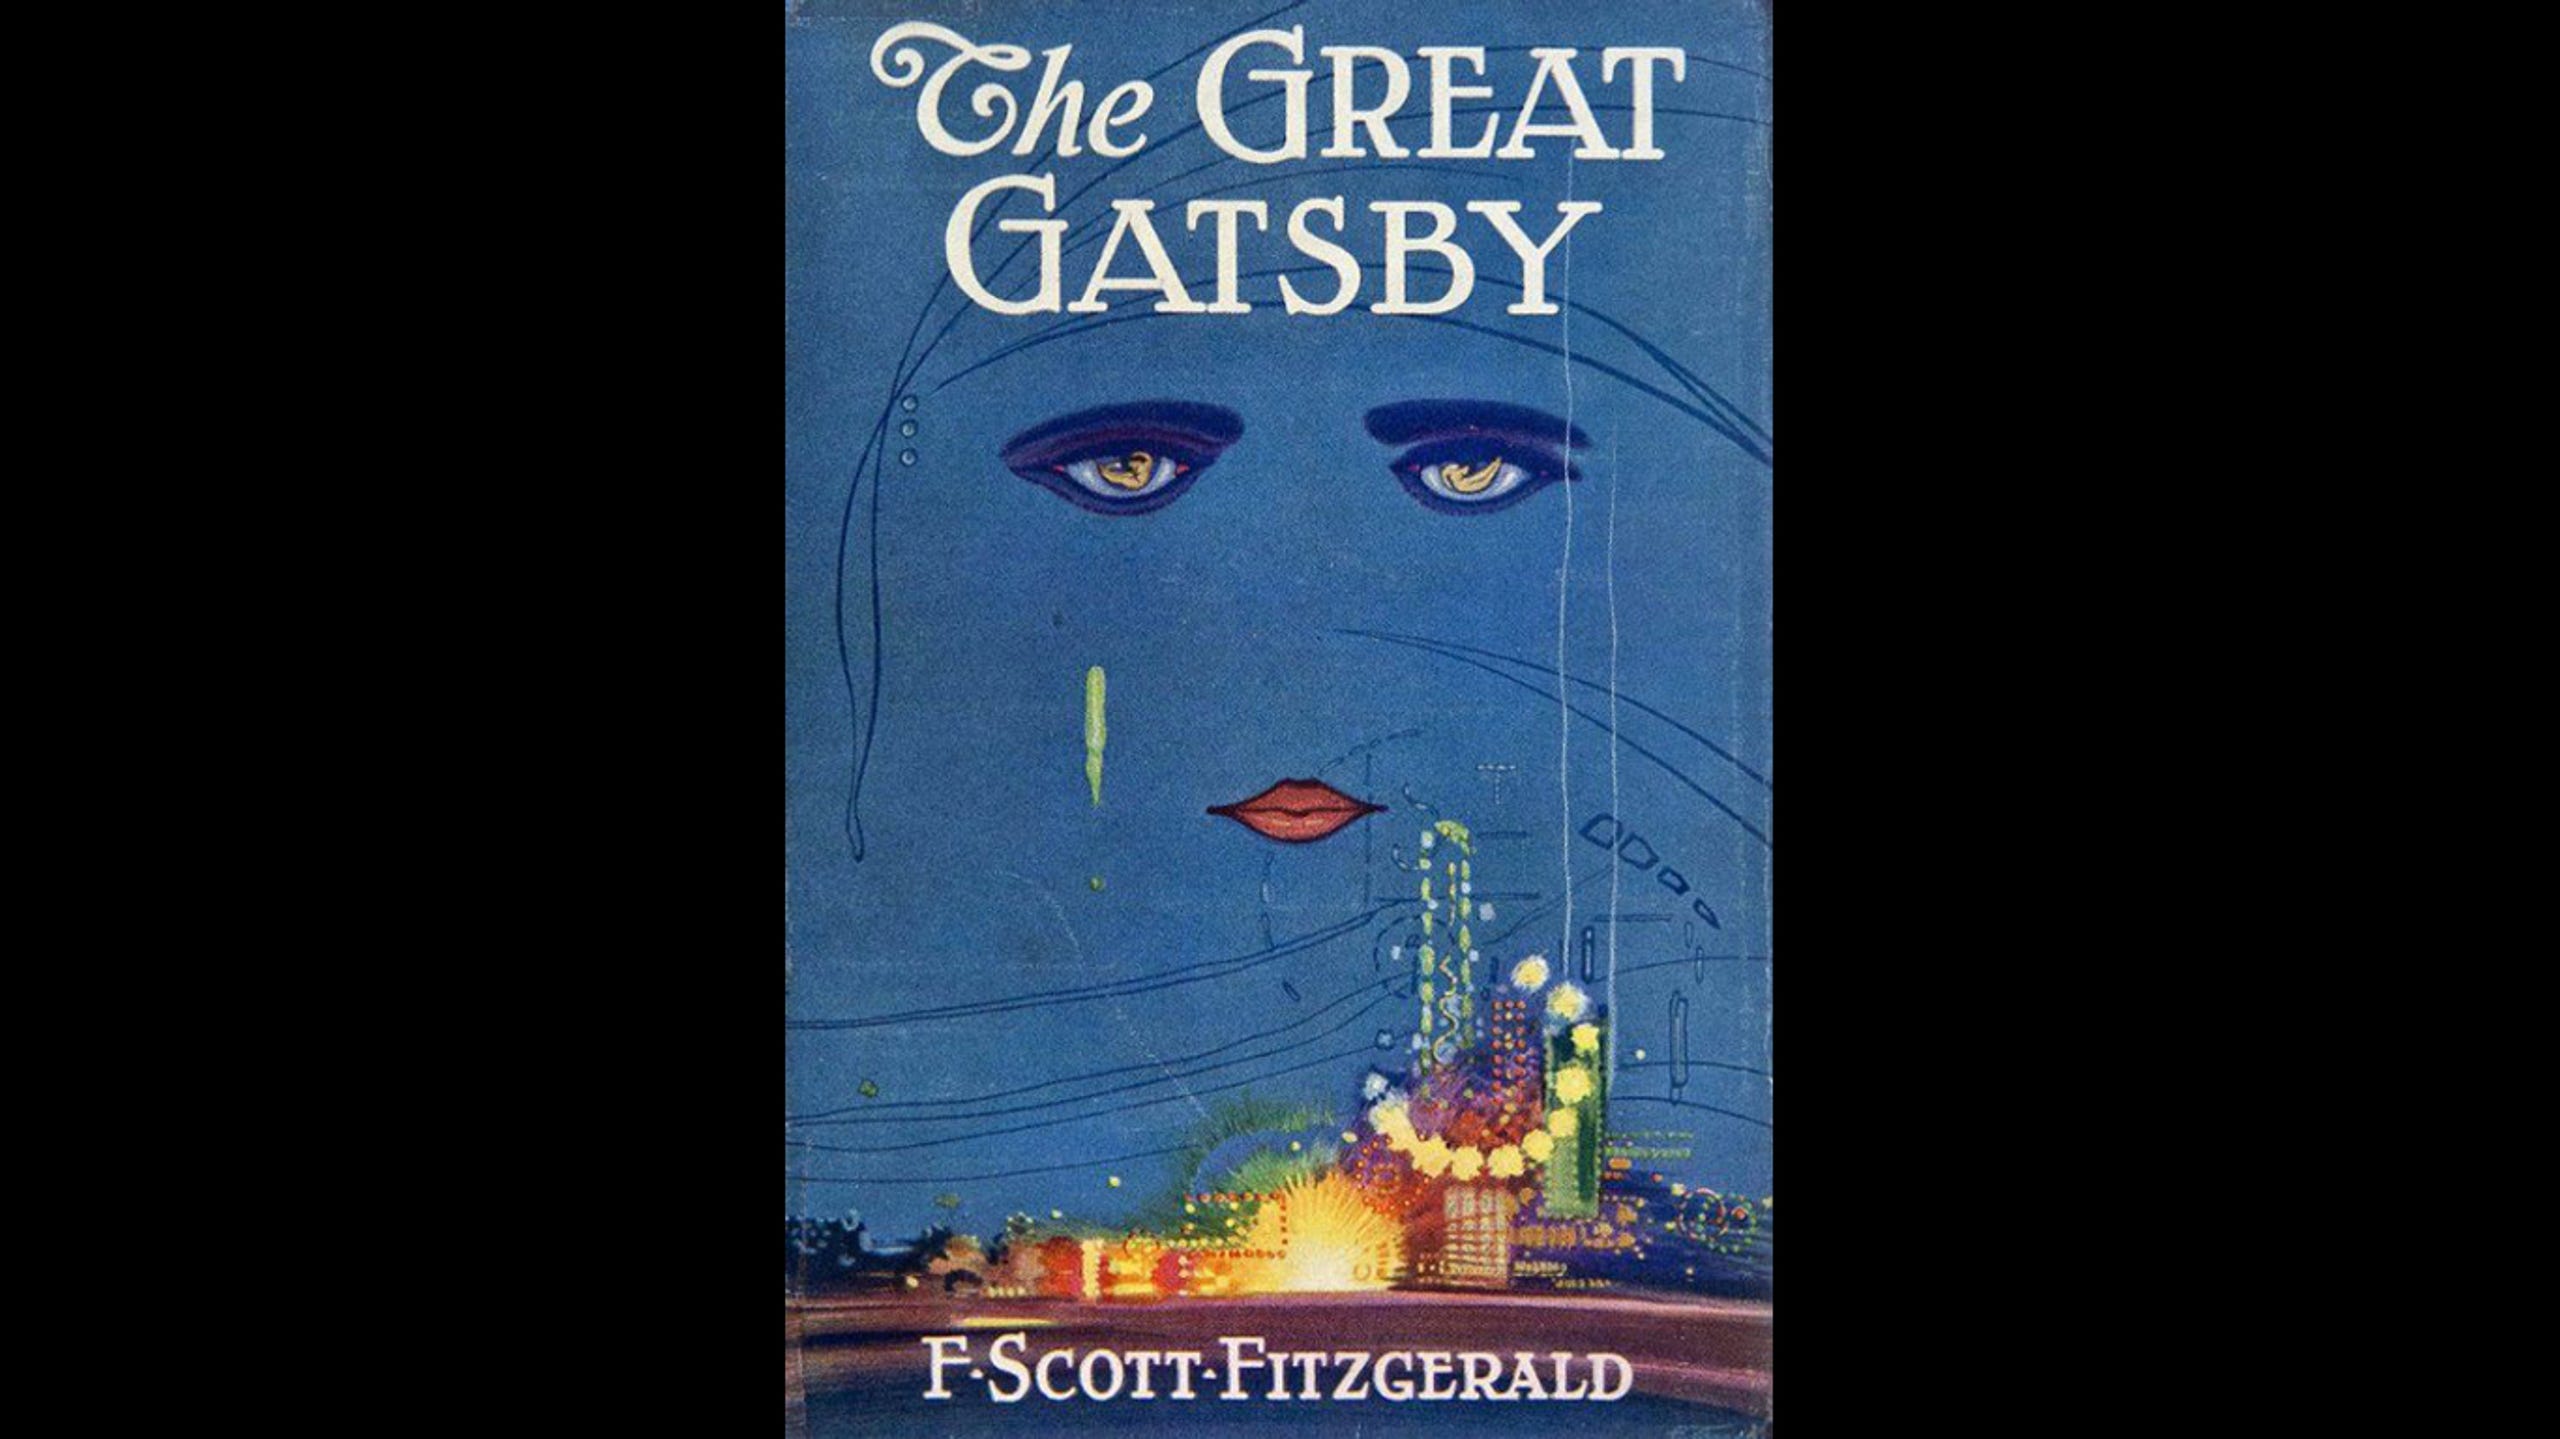 <strong>5. The Great Gatsby </strong><strong>• Author:</strong> F. Scott Fitzgerald <strong>• Originally published in:</strong> 1925 <strong>• </strong>The novel was written in beautiful prose, and "its stylish poetic deconstruction of the American Dream remains timeless," Uruburu said. The basic themes of love and rejection are immortal. Almost anyone can connect with the book on some level – emotional or psychological.